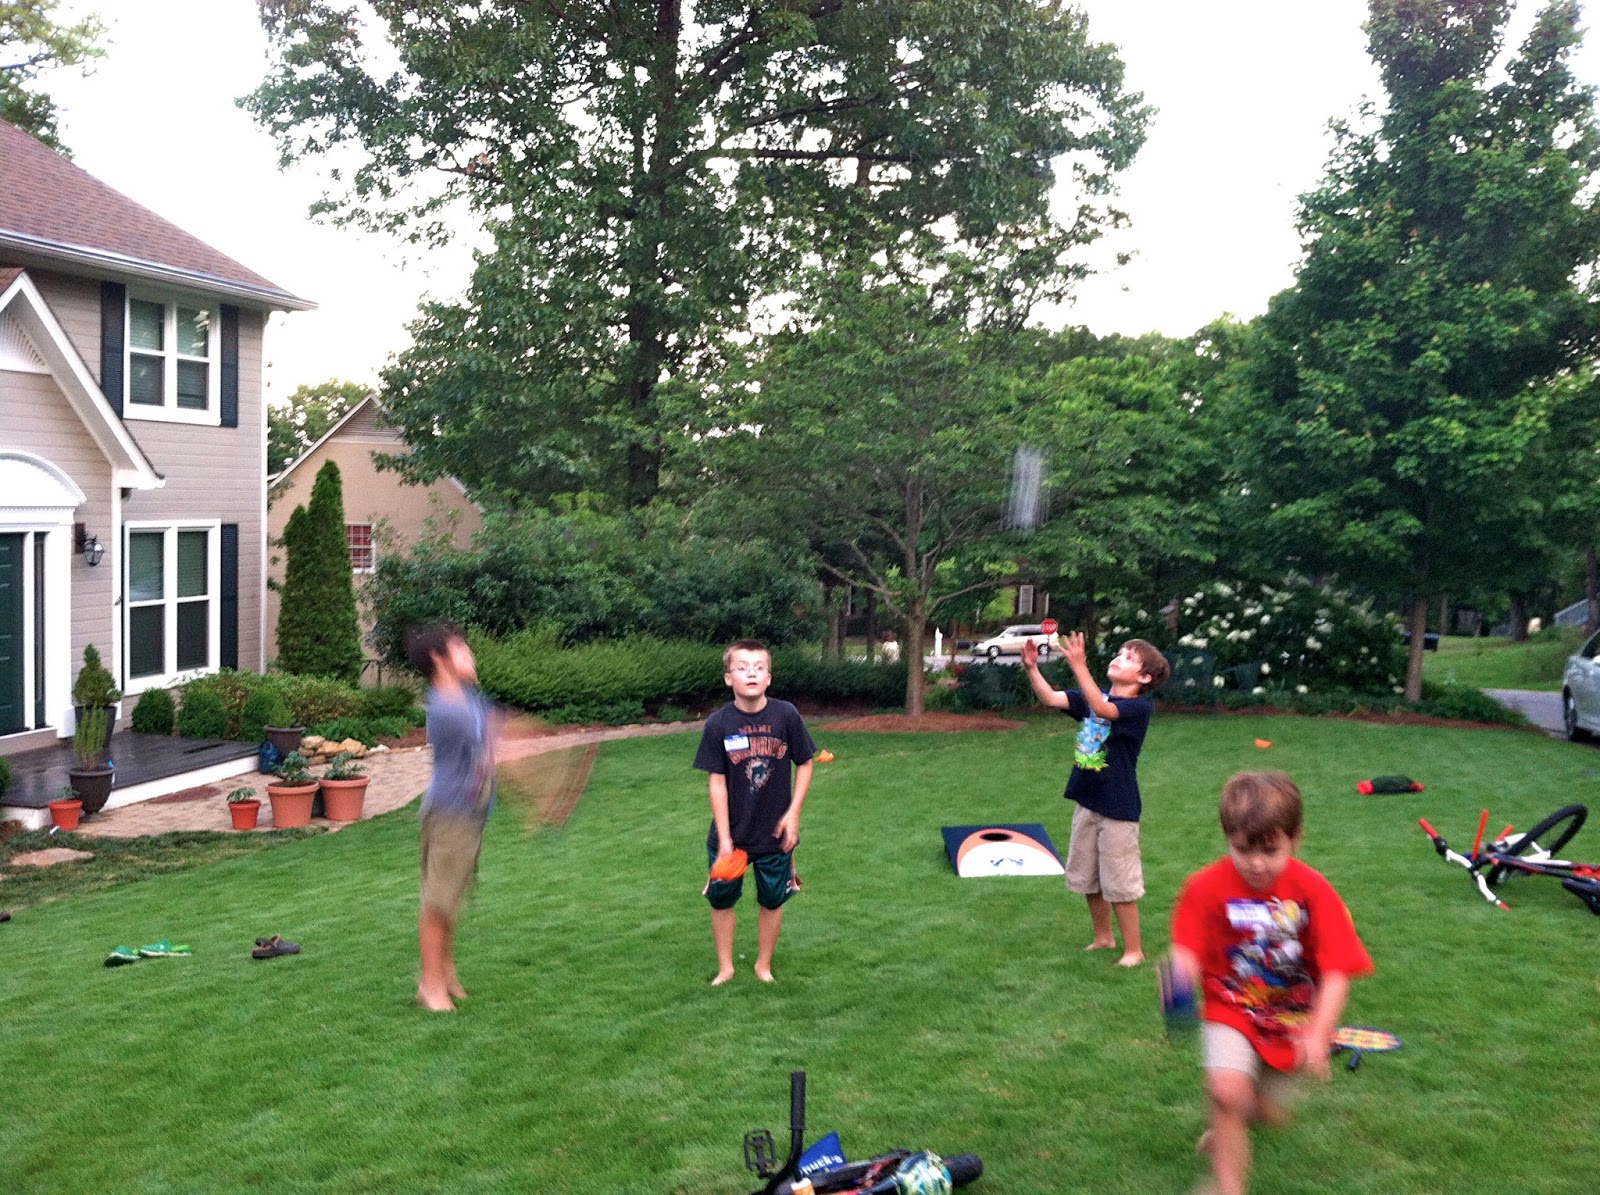 grass stains: Our first block party ... after 13 years